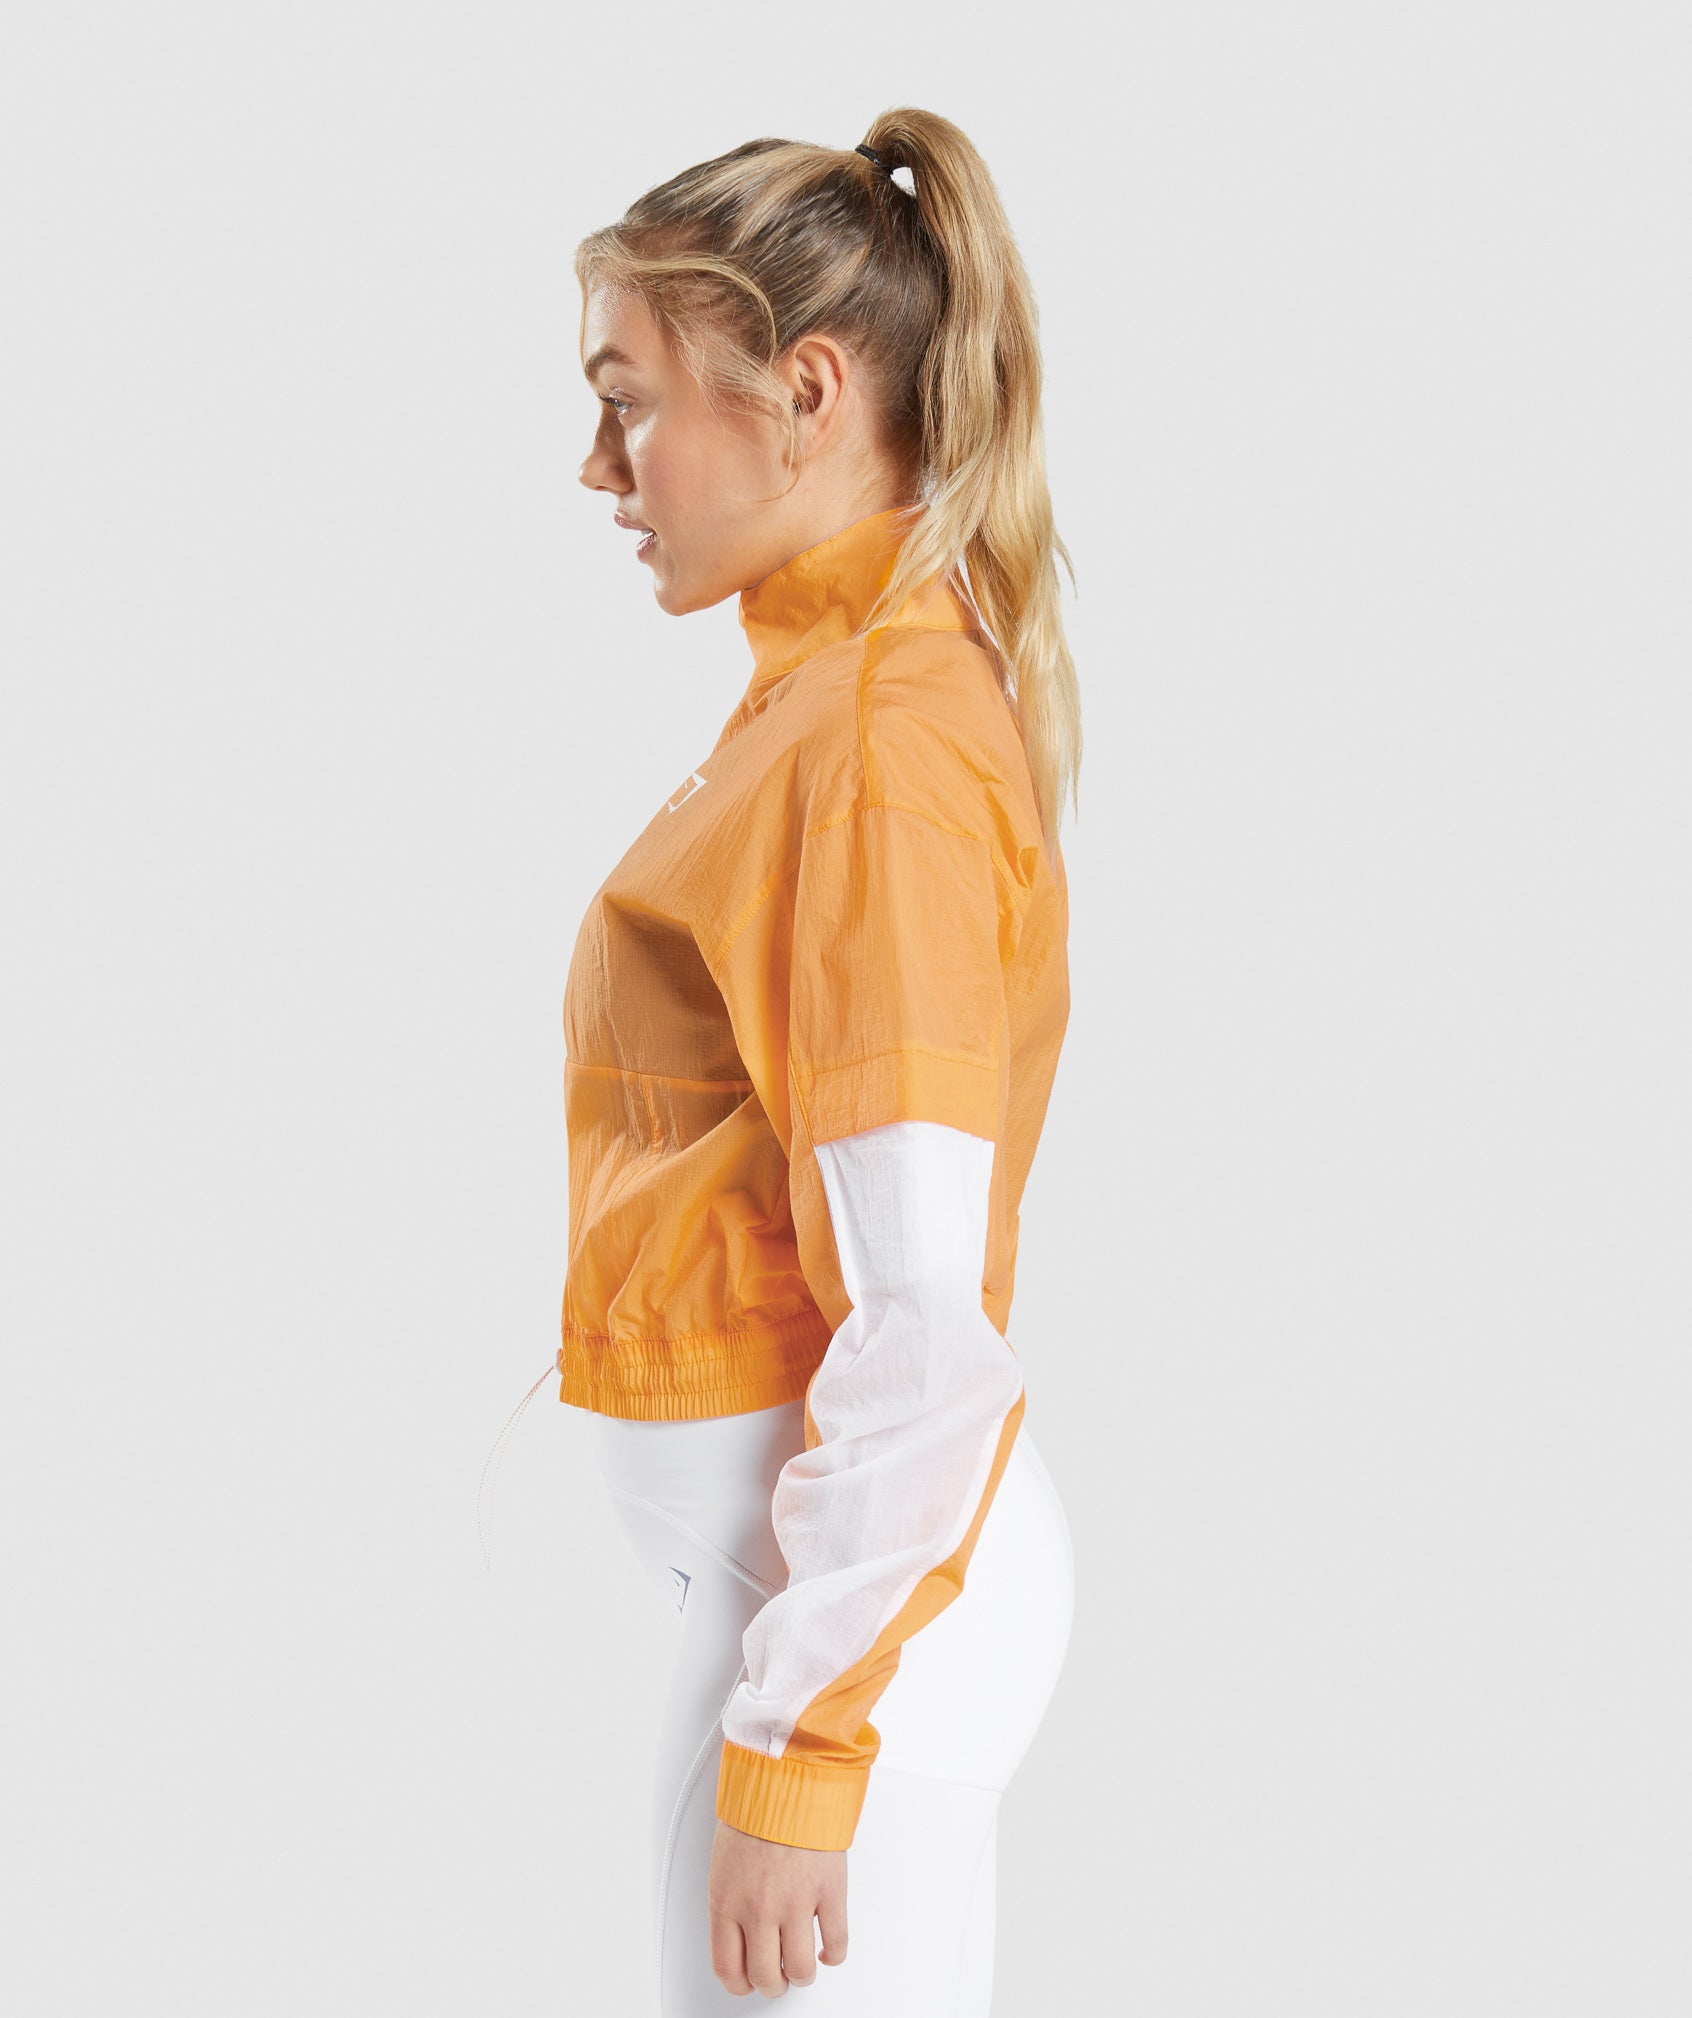 Pulse Woven Jacket in Apricot Orange/White - view 3